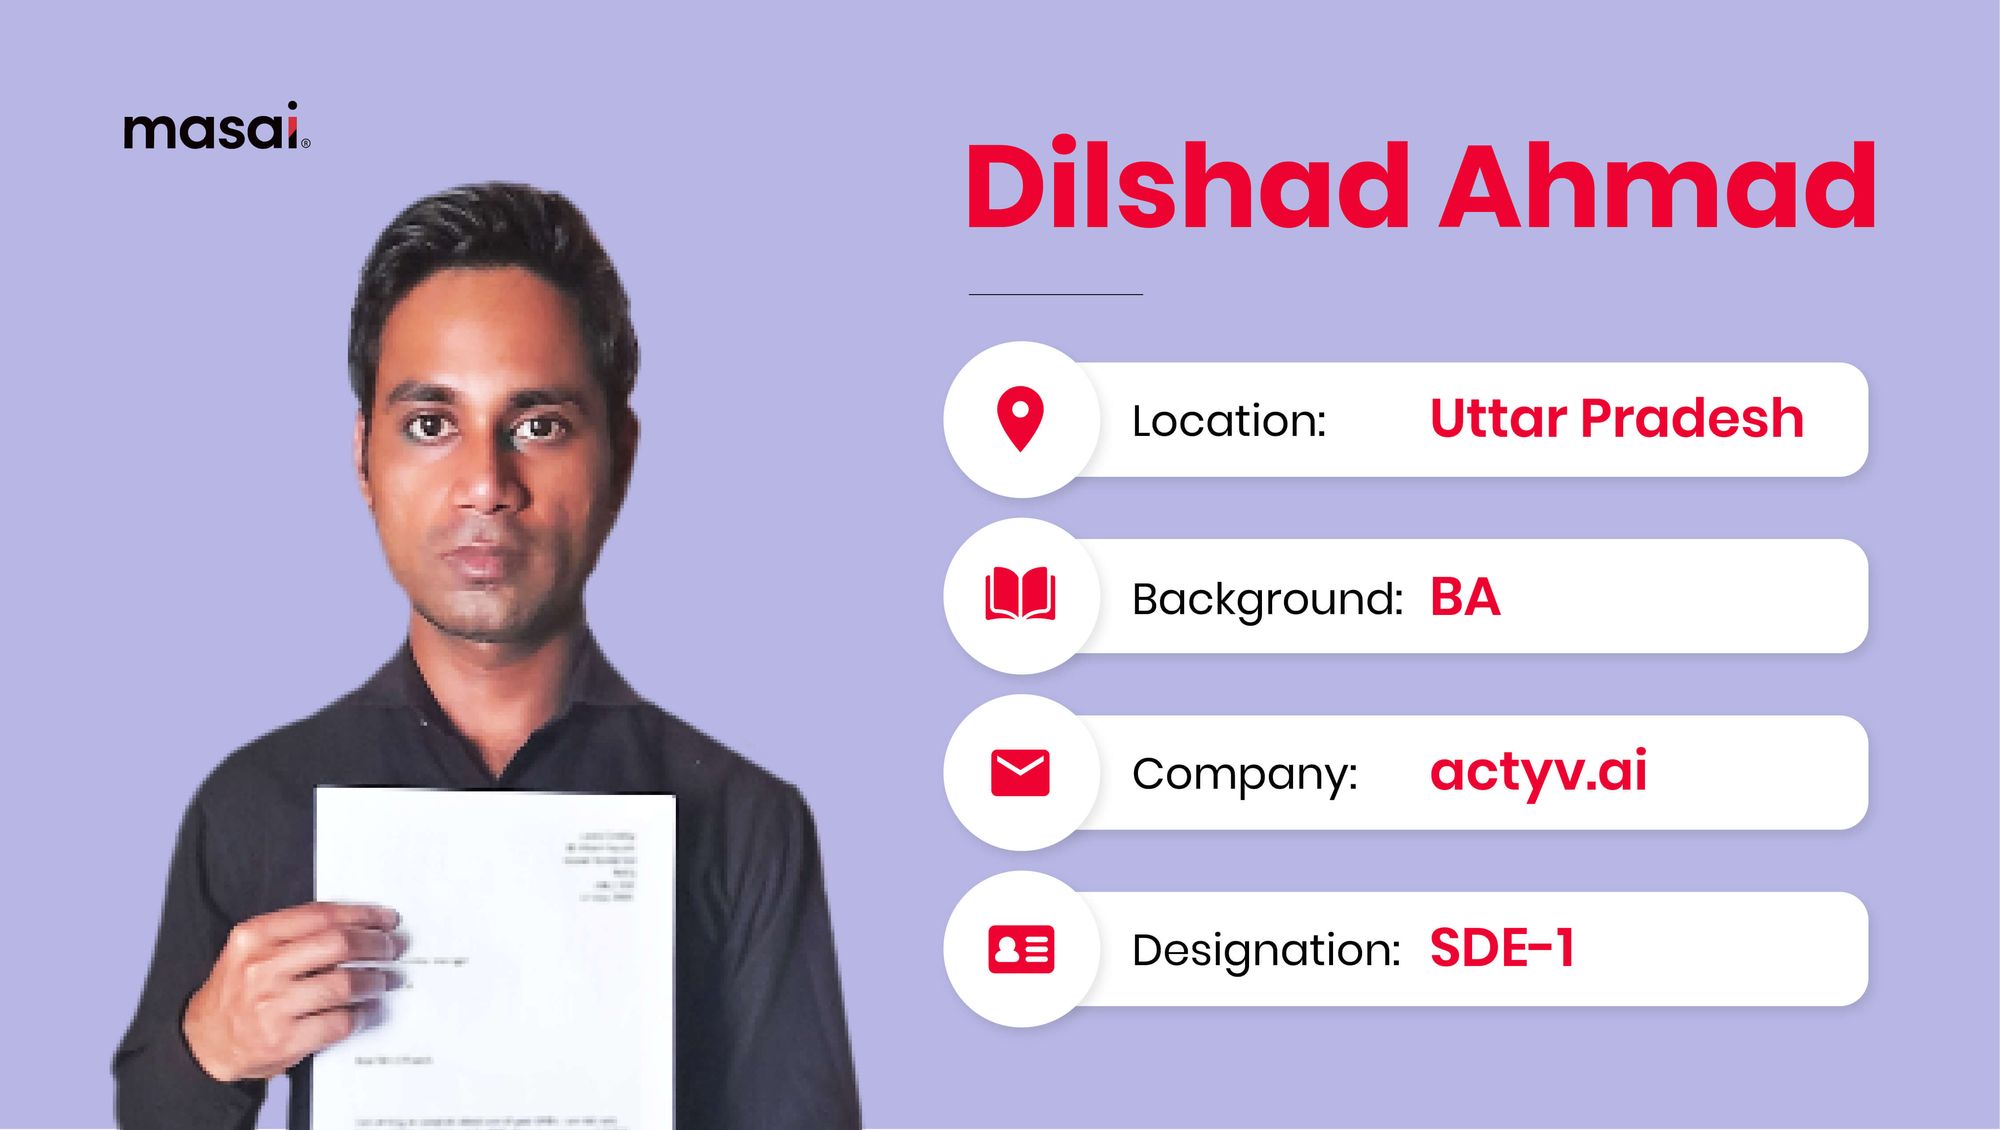 Dilshad Ahmad - A Masai graduate now working at actyv.ai 